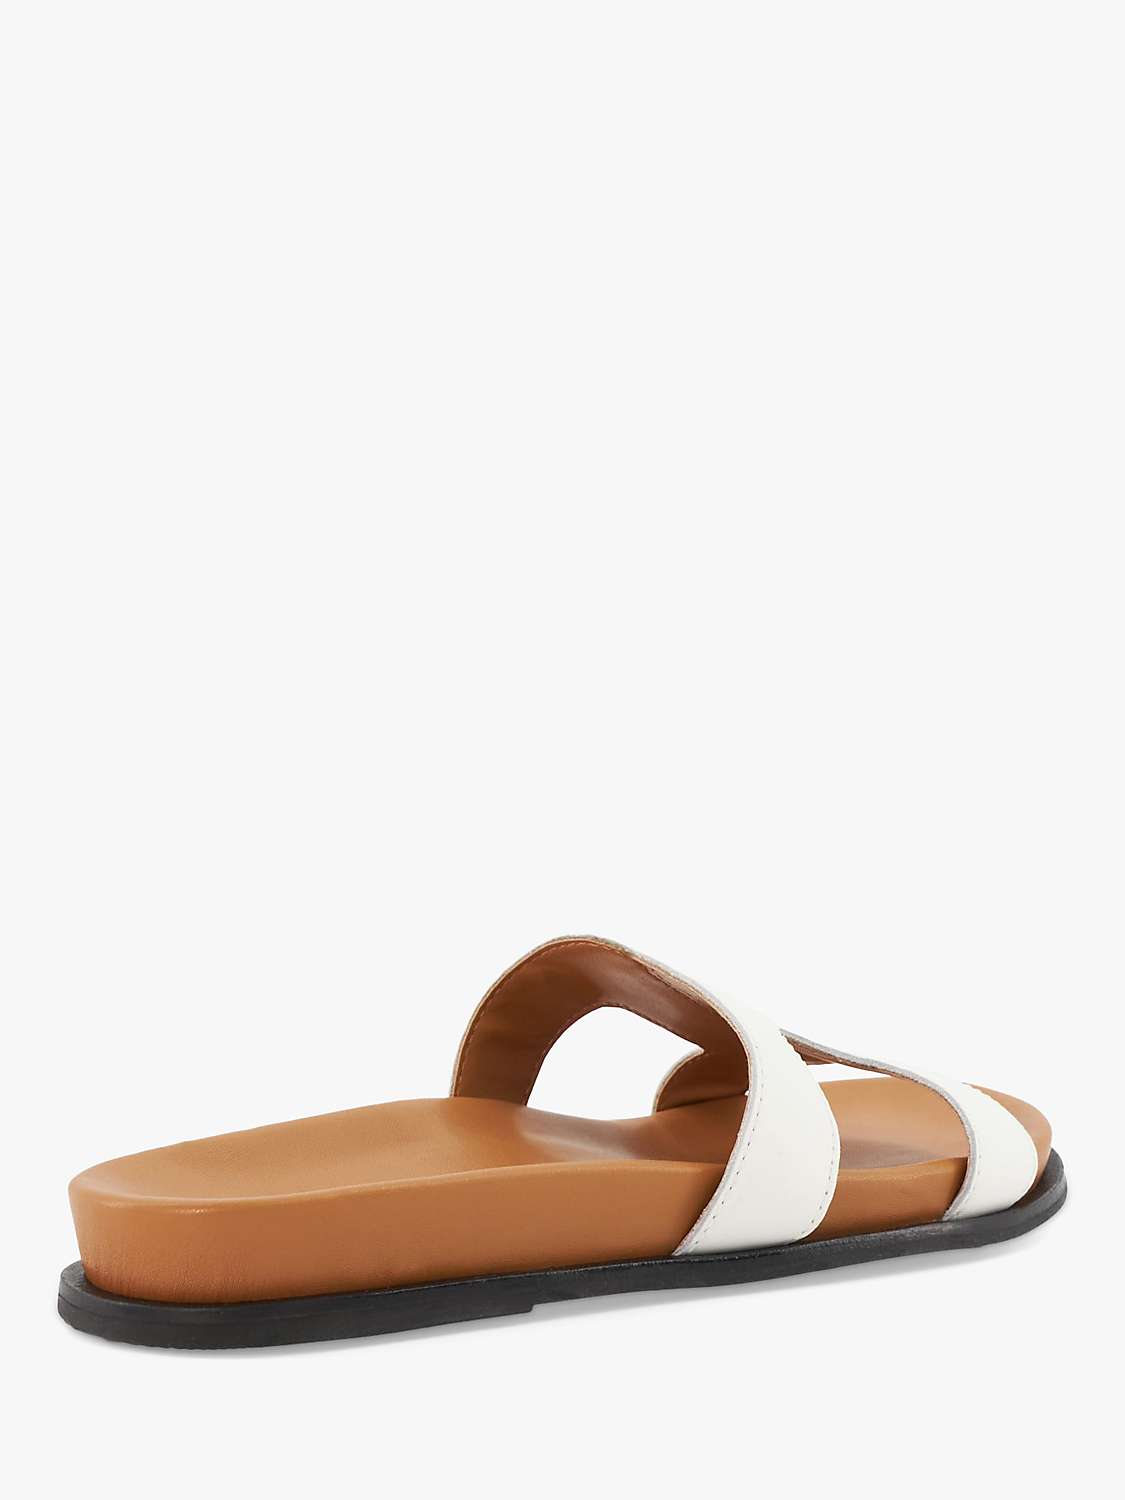 Buy Dune Loupa Leather Sandals, White Online at johnlewis.com